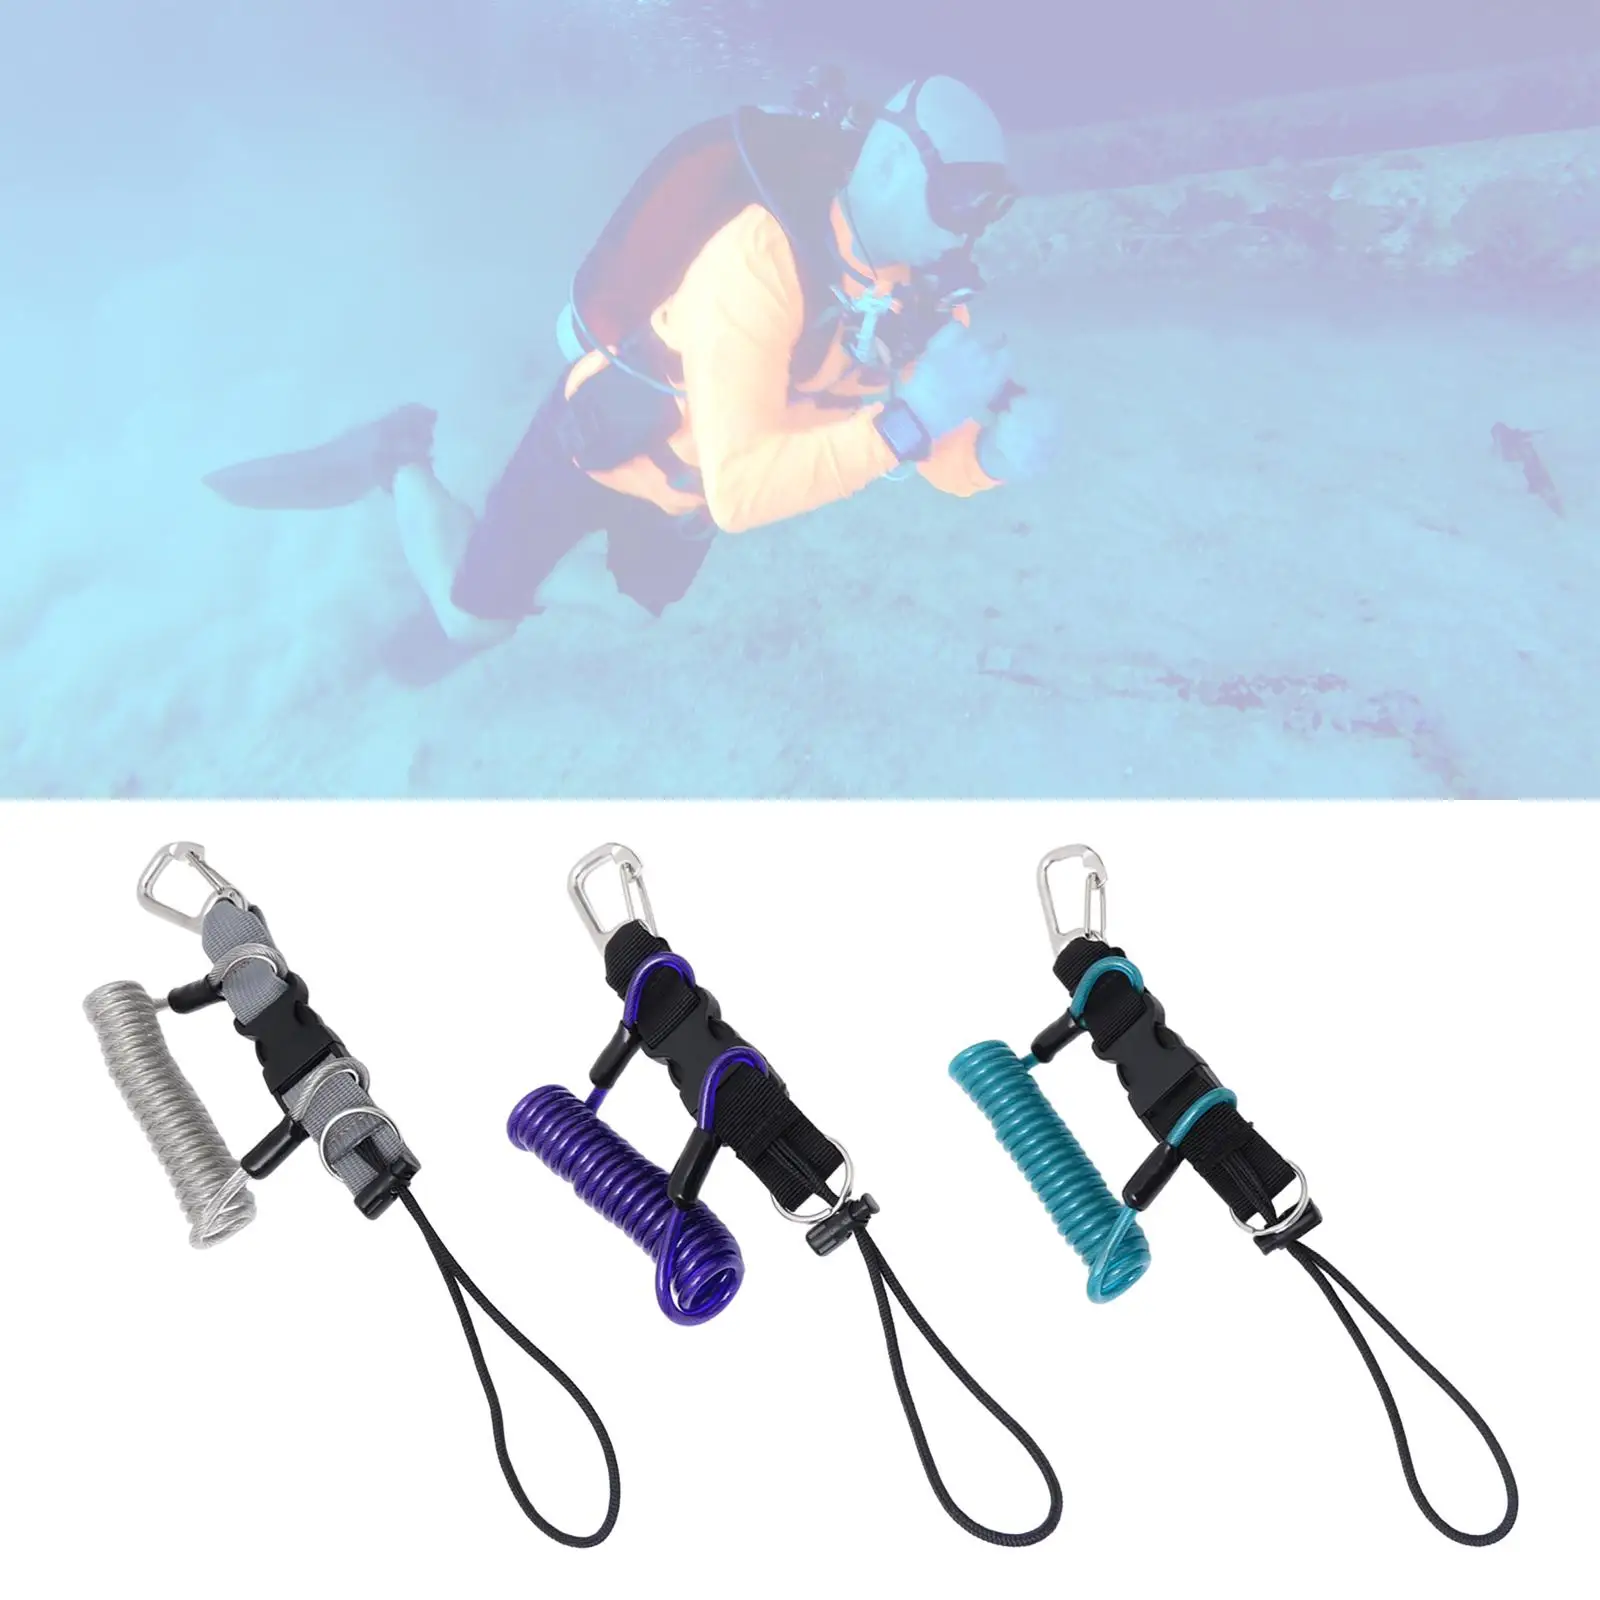 Scuba Diving Coil Lanyard Safety Rope with Hook Quick Release Buckle Freediving